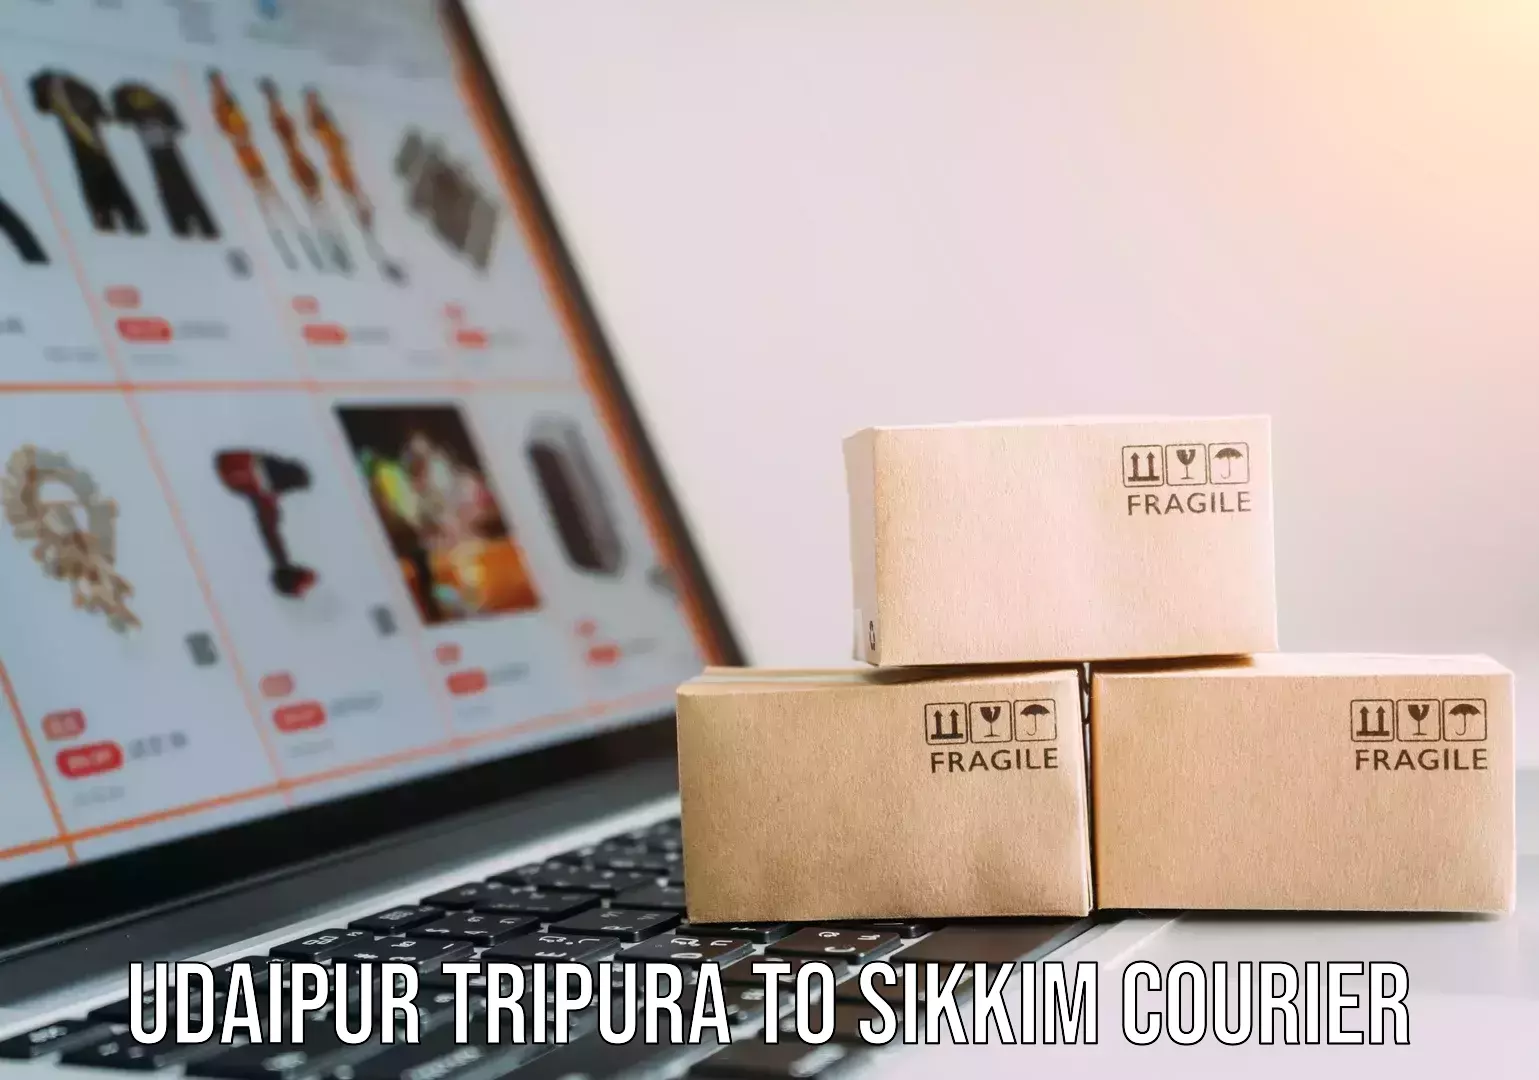 Online shipping calculator Udaipur Tripura to Sikkim